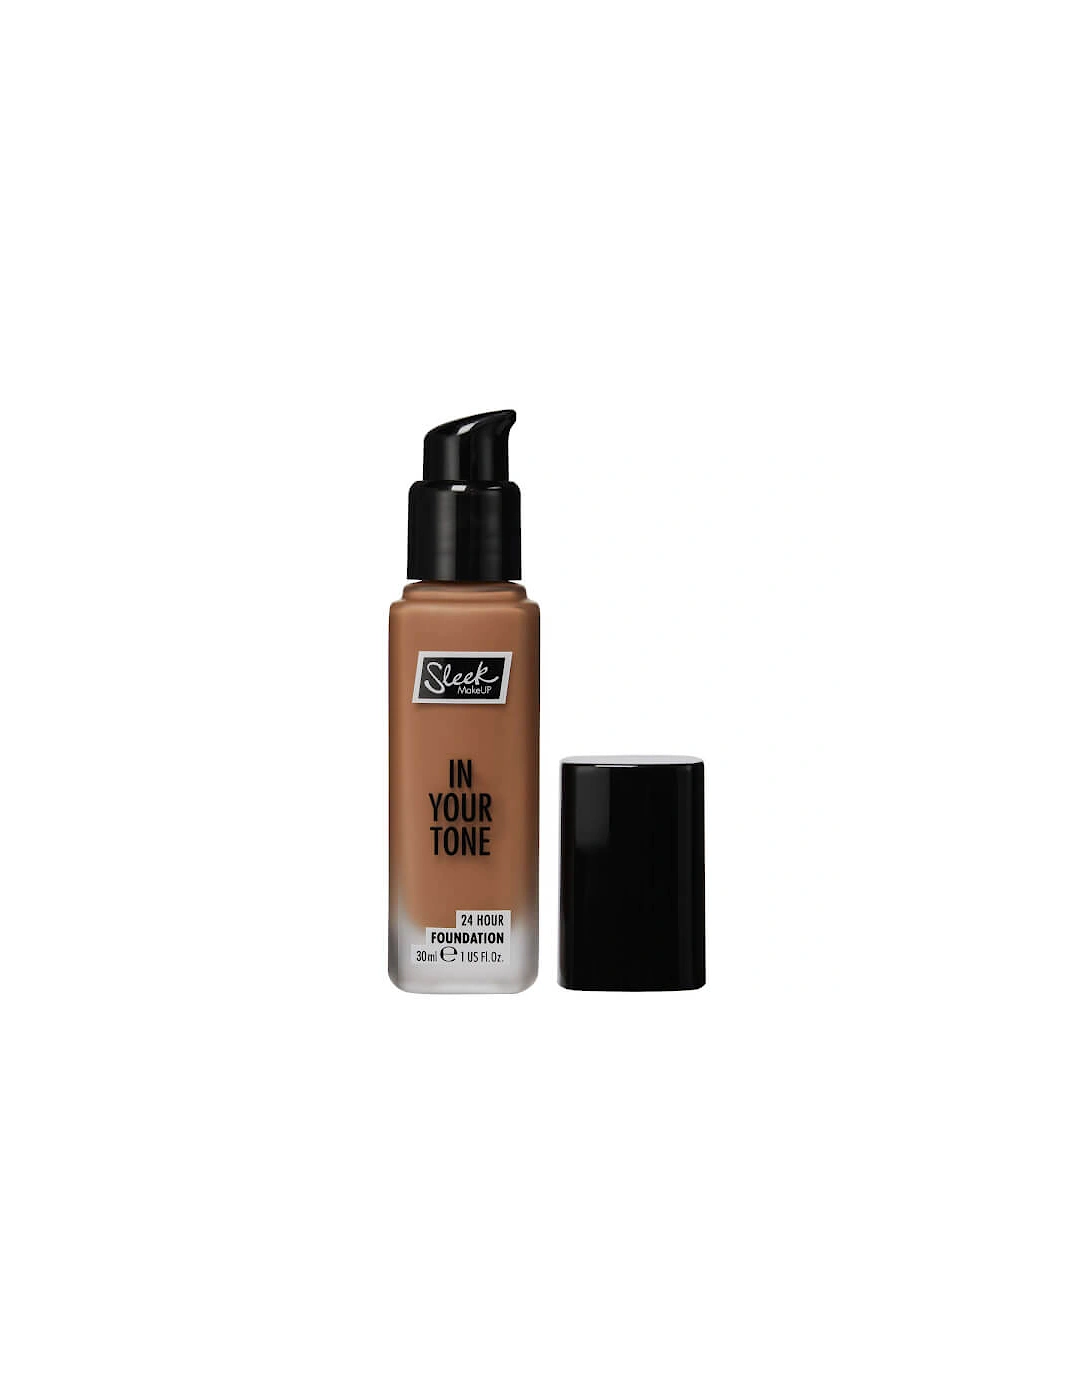 in Your Tone 24 Hour Foundation - 9N, 2 of 1